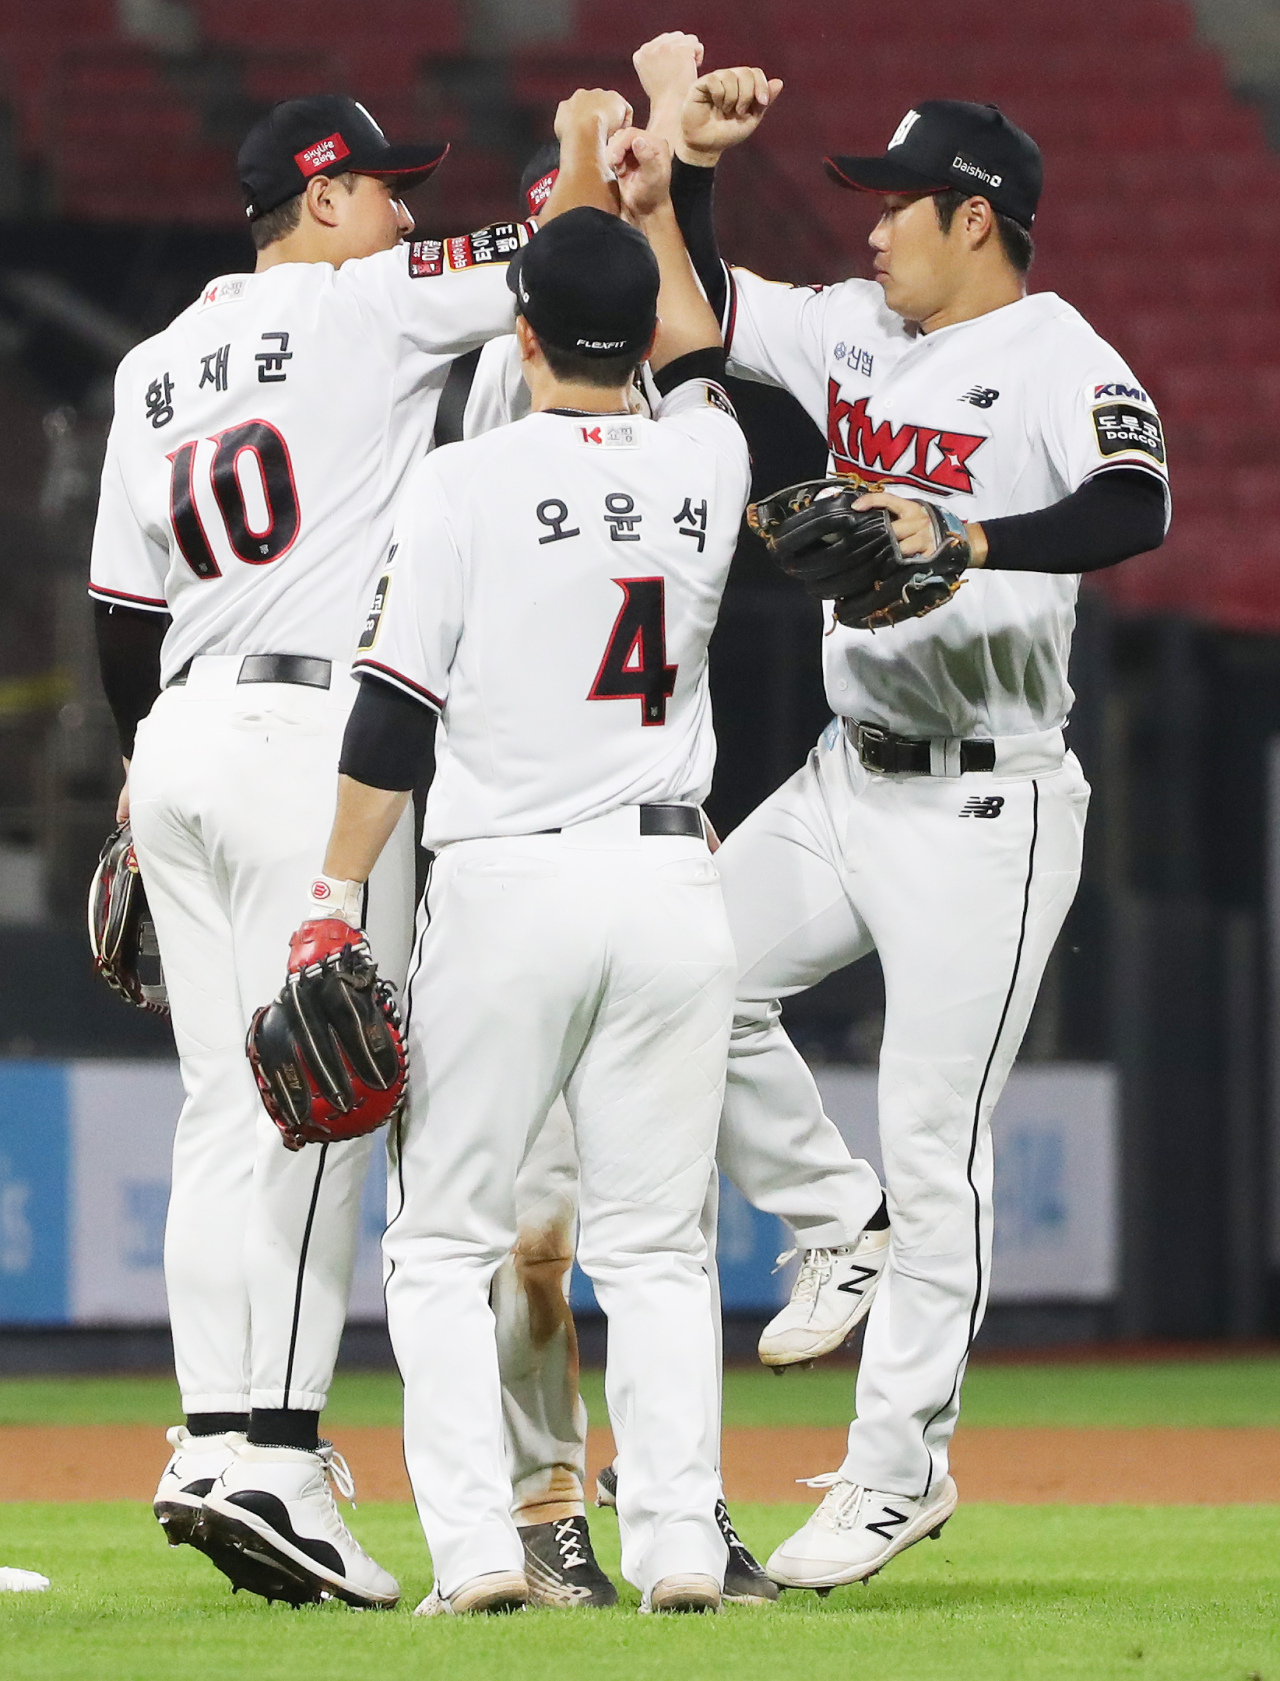 Members of the KT Wiz celebrate their 8-3 victory over the Samsung Lions in a Korea Baseball Organization regular season game at KT Wiz Park in Suwon, 45 kilometers south of Seoul, on Sunday. (Yonhap)